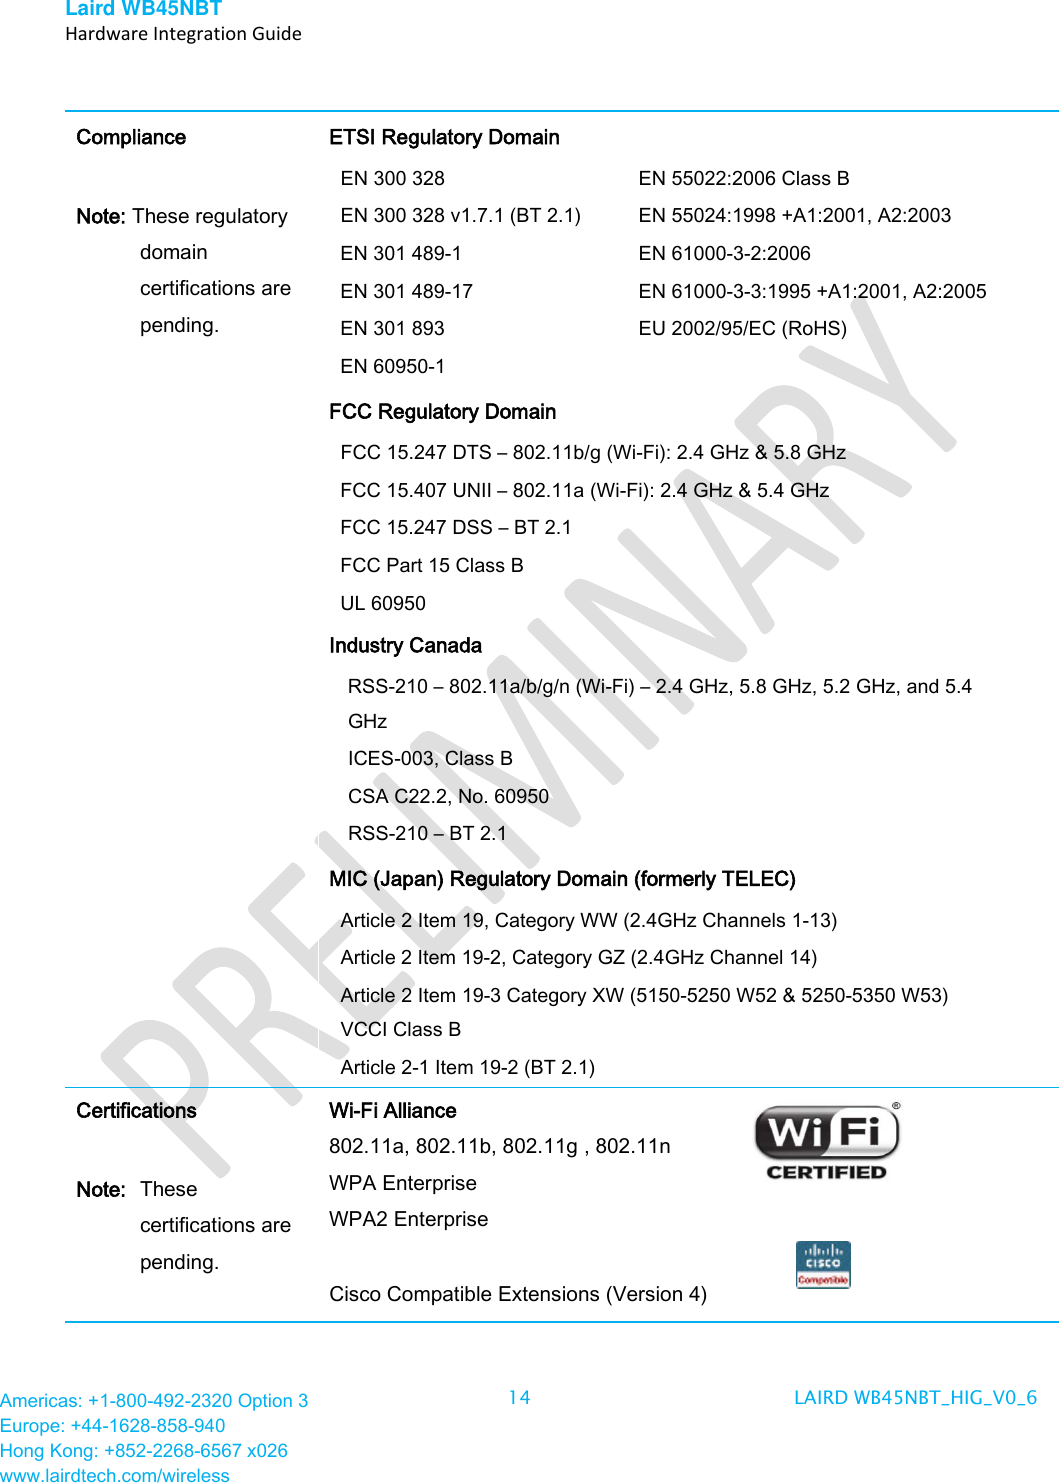 Laird WB45NBT   Hardware Integration Guide  Americas: +1-800-492-2320 Option 3 Europe: +44-1628-858-940 Hong Kong: +852-2268-6567 x026 www.lairdtech.com/wireless 14 LAIRD WB45NBT_HIG_V0_6   Compliance  Note: These regulatory domain certifications are pending. ETSI Regulatory Domain EN 300 328 EN 300 328 v1.7.1 (BT 2.1) EN 301 489-1 EN 301 489-17 EN 301 893 EN 60950-1 EN 55022:2006 Class B EN 55024:1998 +A1:2001, A2:2003 EN 61000-3-2:2006 EN 61000-3-3:1995 +A1:2001, A2:2005 EU 2002/95/EC (RoHS) FCC Regulatory Domain FCC 15.247 DTS – 802.11b/g (Wi-Fi): 2.4 GHz &amp; 5.8 GHz FCC 15.407 UNII – 802.11a (Wi-Fi): 2.4 GHz &amp; 5.4 GHz FCC 15.247 DSS – BT 2.1  FCC Part 15 Class B UL 60950 Industry Canada RSS-210 – 802.11a/b/g/n (Wi-Fi) – 2.4 GHz, 5.8 GHz, 5.2 GHz, and 5.4 GHz ICES-003, Class B CSA C22.2, No. 60950 RSS-210 – BT 2.1  MIC (Japan) Regulatory Domain (formerly TELEC) Article 2 Item 19, Category WW (2.4GHz Channels 1-13) Article 2 Item 19-2, Category GZ (2.4GHz Channel 14) Article 2 Item 19-3 Category XW (5150-5250 W52 &amp; 5250-5350 W53) VCCI Class B Article 2-1 Item 19-2 (BT 2.1)  Certifications  Note:  These certifications are pending.  Wi-Fi Alliance 802.11a, 802.11b, 802.11g , 802.11n WPA Enterprise  WPA2 Enterprise    Cisco Compatible Extensions (Version 4) 